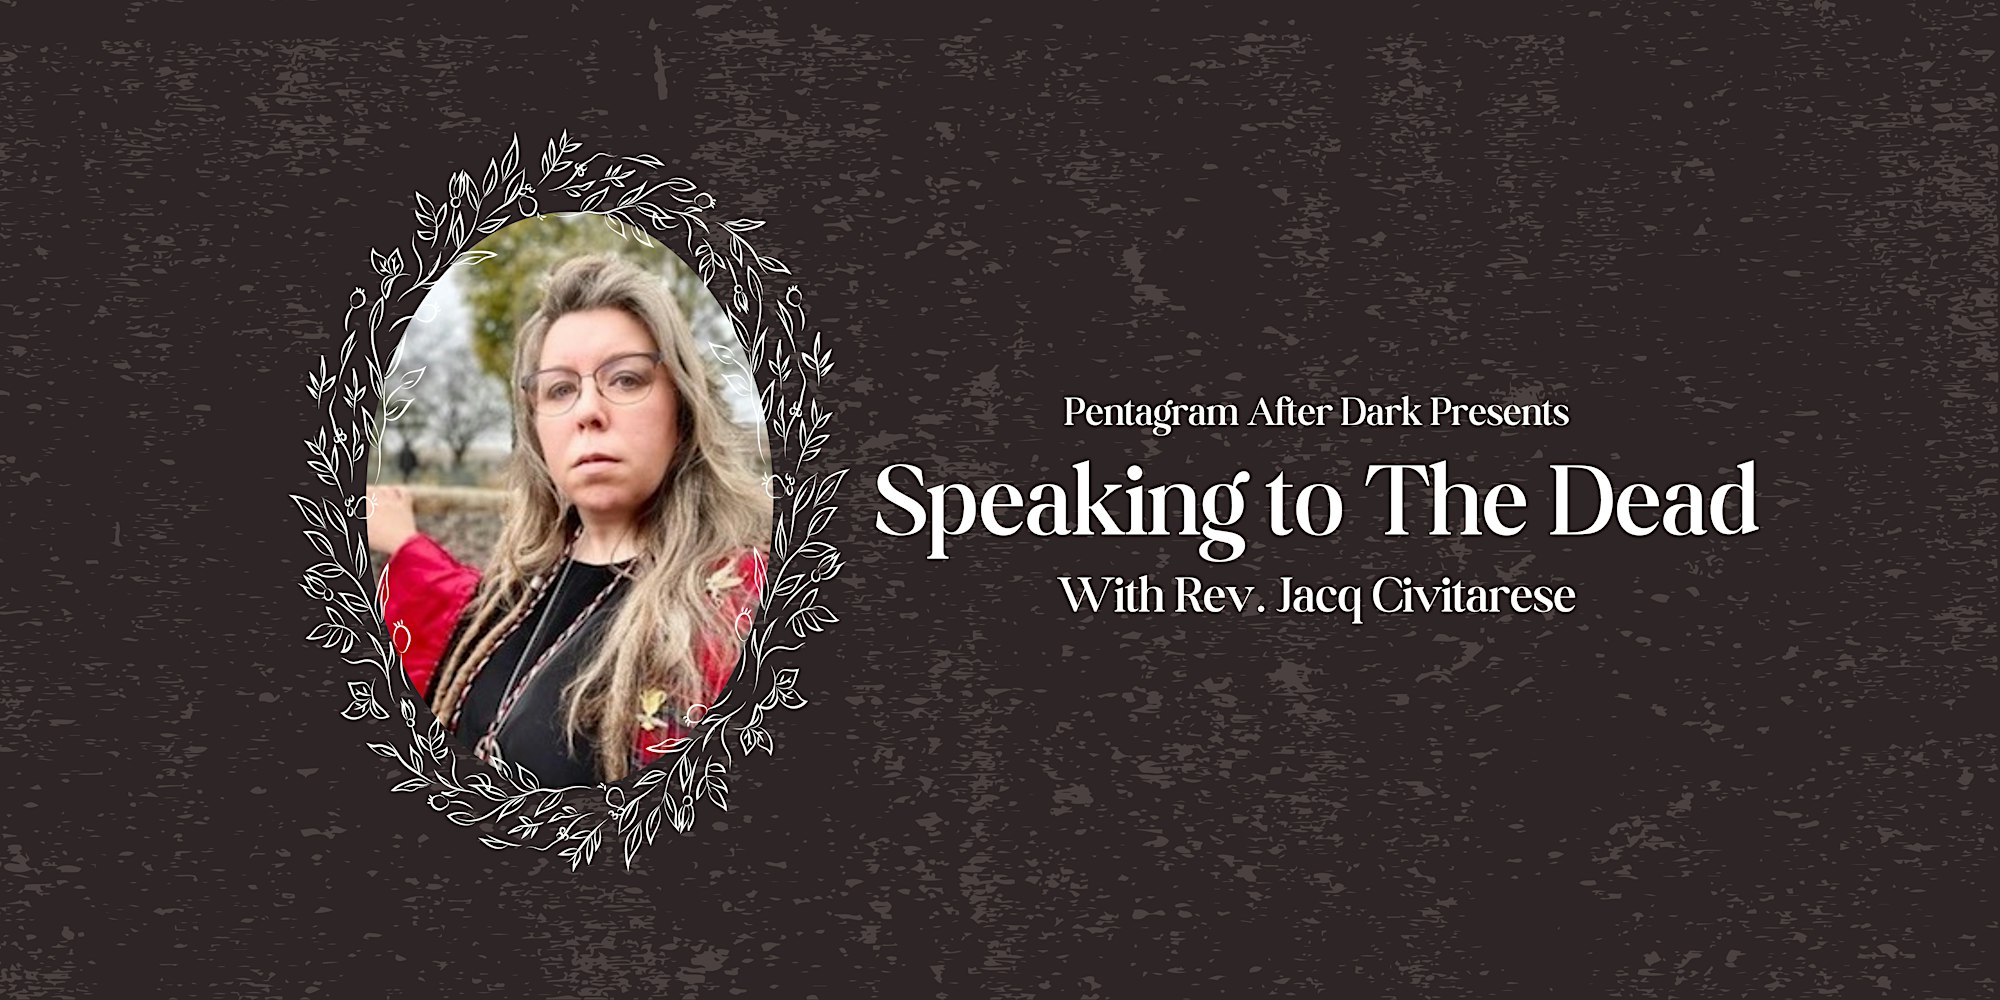 Catch a glimpse of our upcoming event, "Connecting with the Afterlife with Rev. Jacq Civitarese." The promotional artwork showcases a person deeply engaged in thought, encased within an artistic circular border adorned with intricate designs.